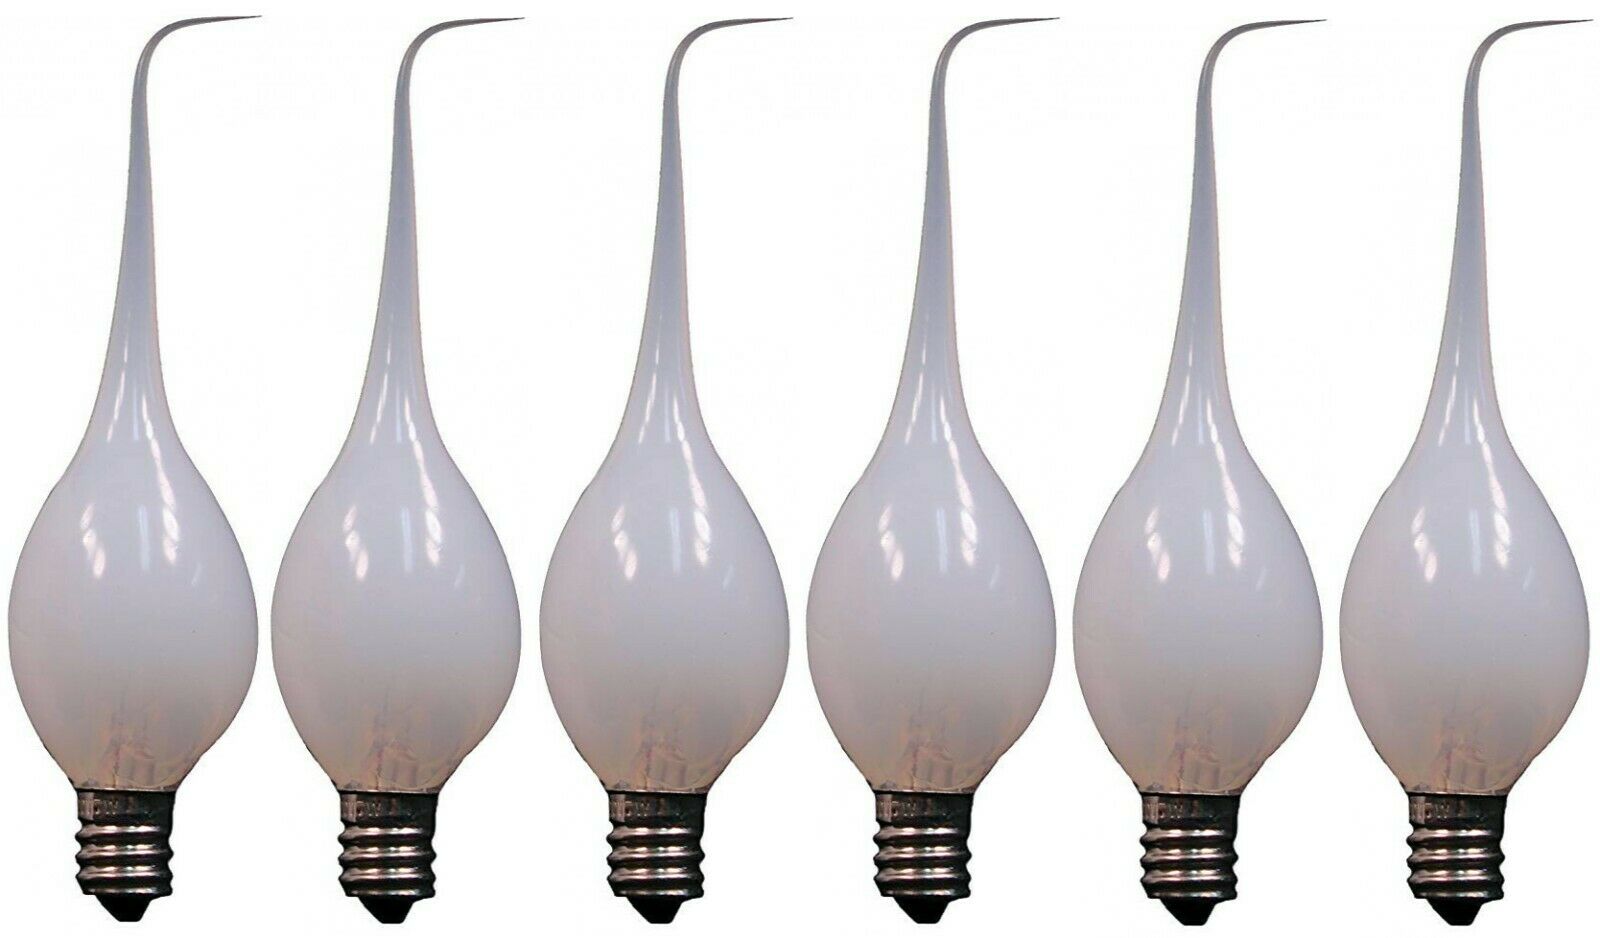 6-Pack, Silicone Dipped Candle Light Bulbs, 7 Watt, Longer Life Country Style